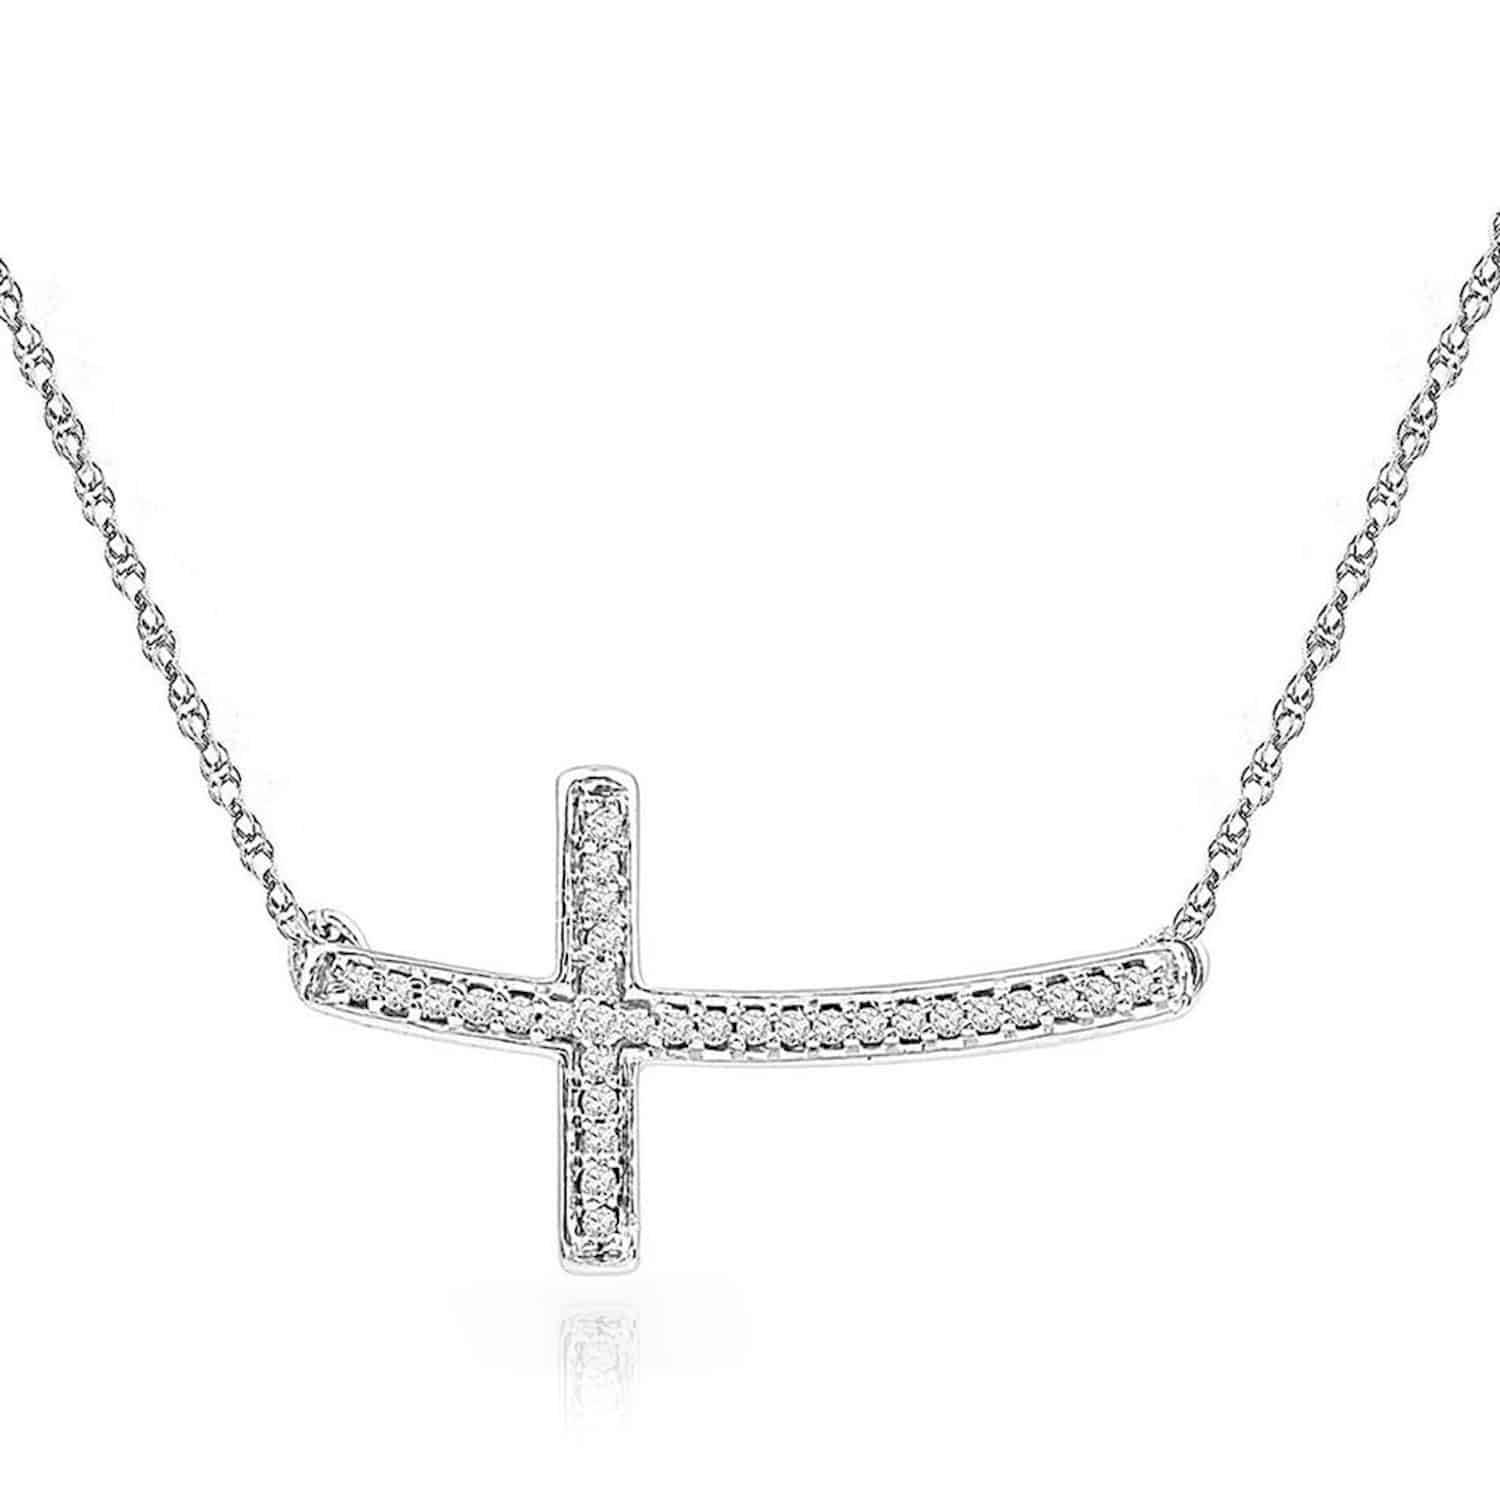 Natural Diamond 18K White Gold Over Silver Sideways Cross Pendant Necklace 17"